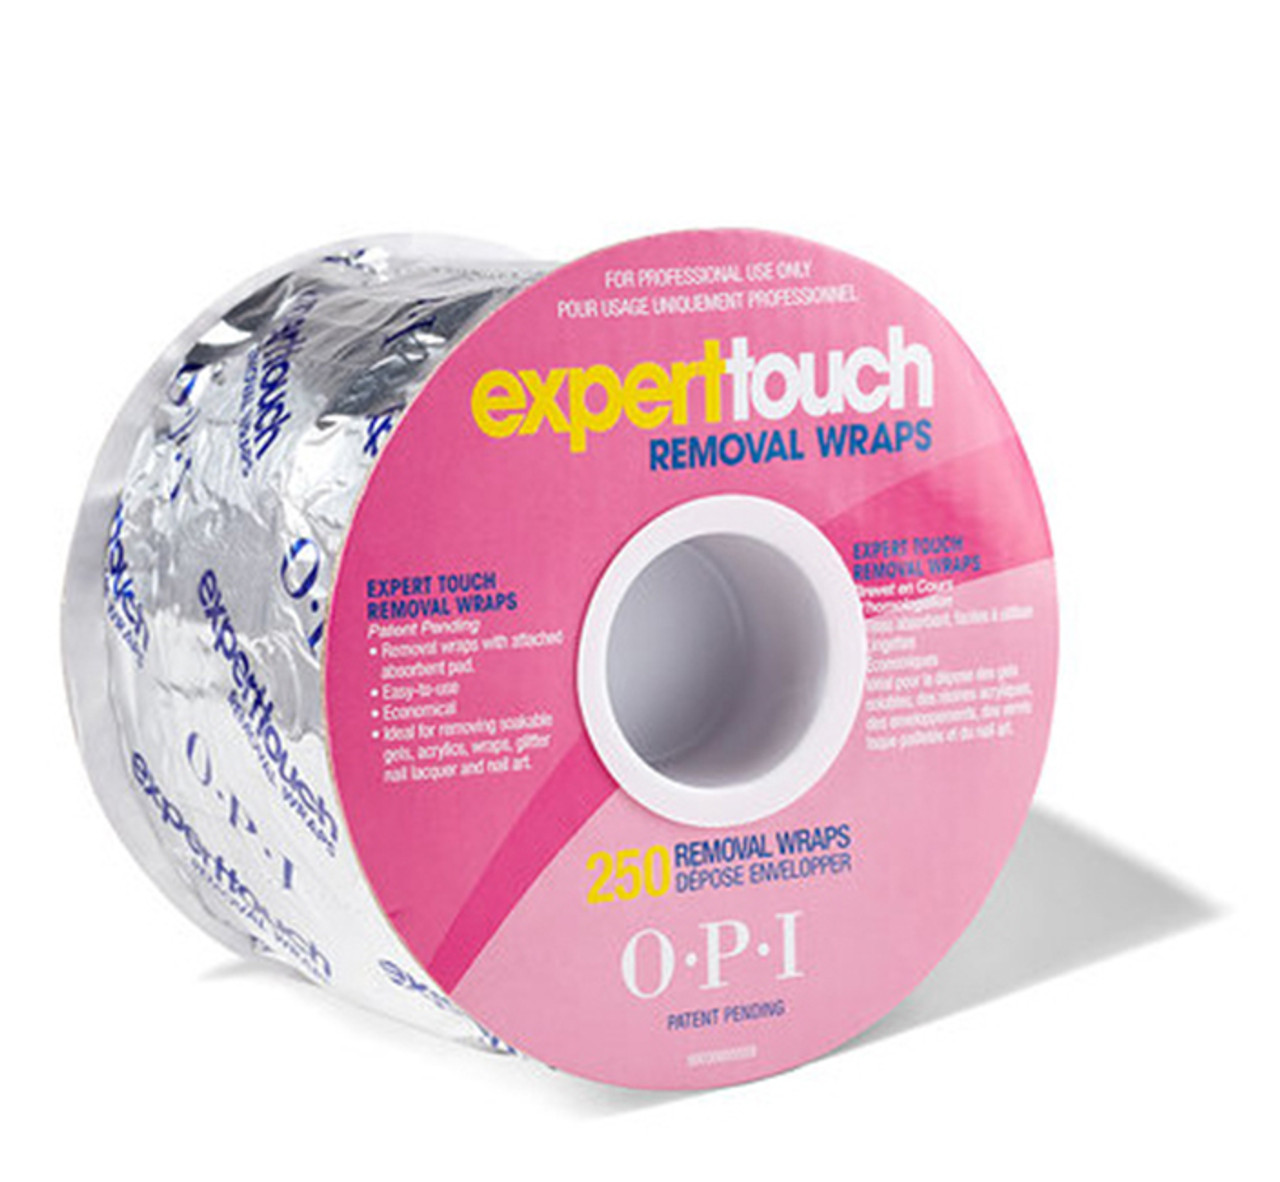 OPI Expert Touch Removal Wraps - 250/Roll